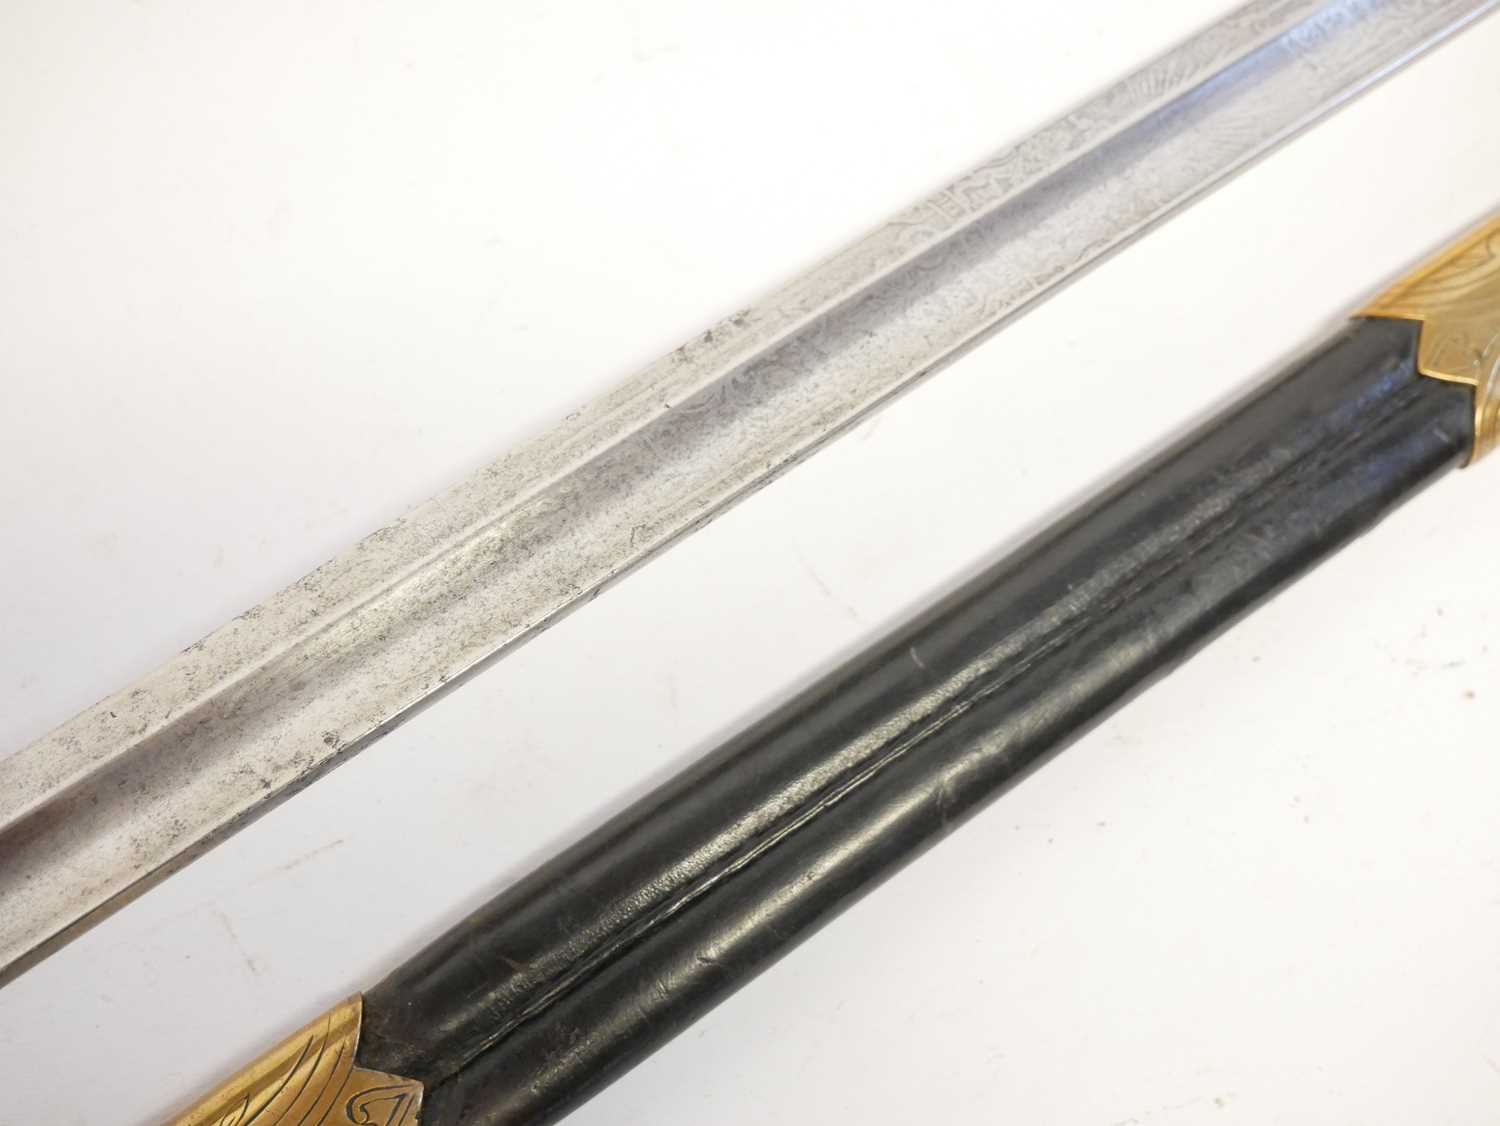 Royal Navy Petty Officer's sword, similar to an 1827 Naval sword but without the lion head pommel, - Image 13 of 16